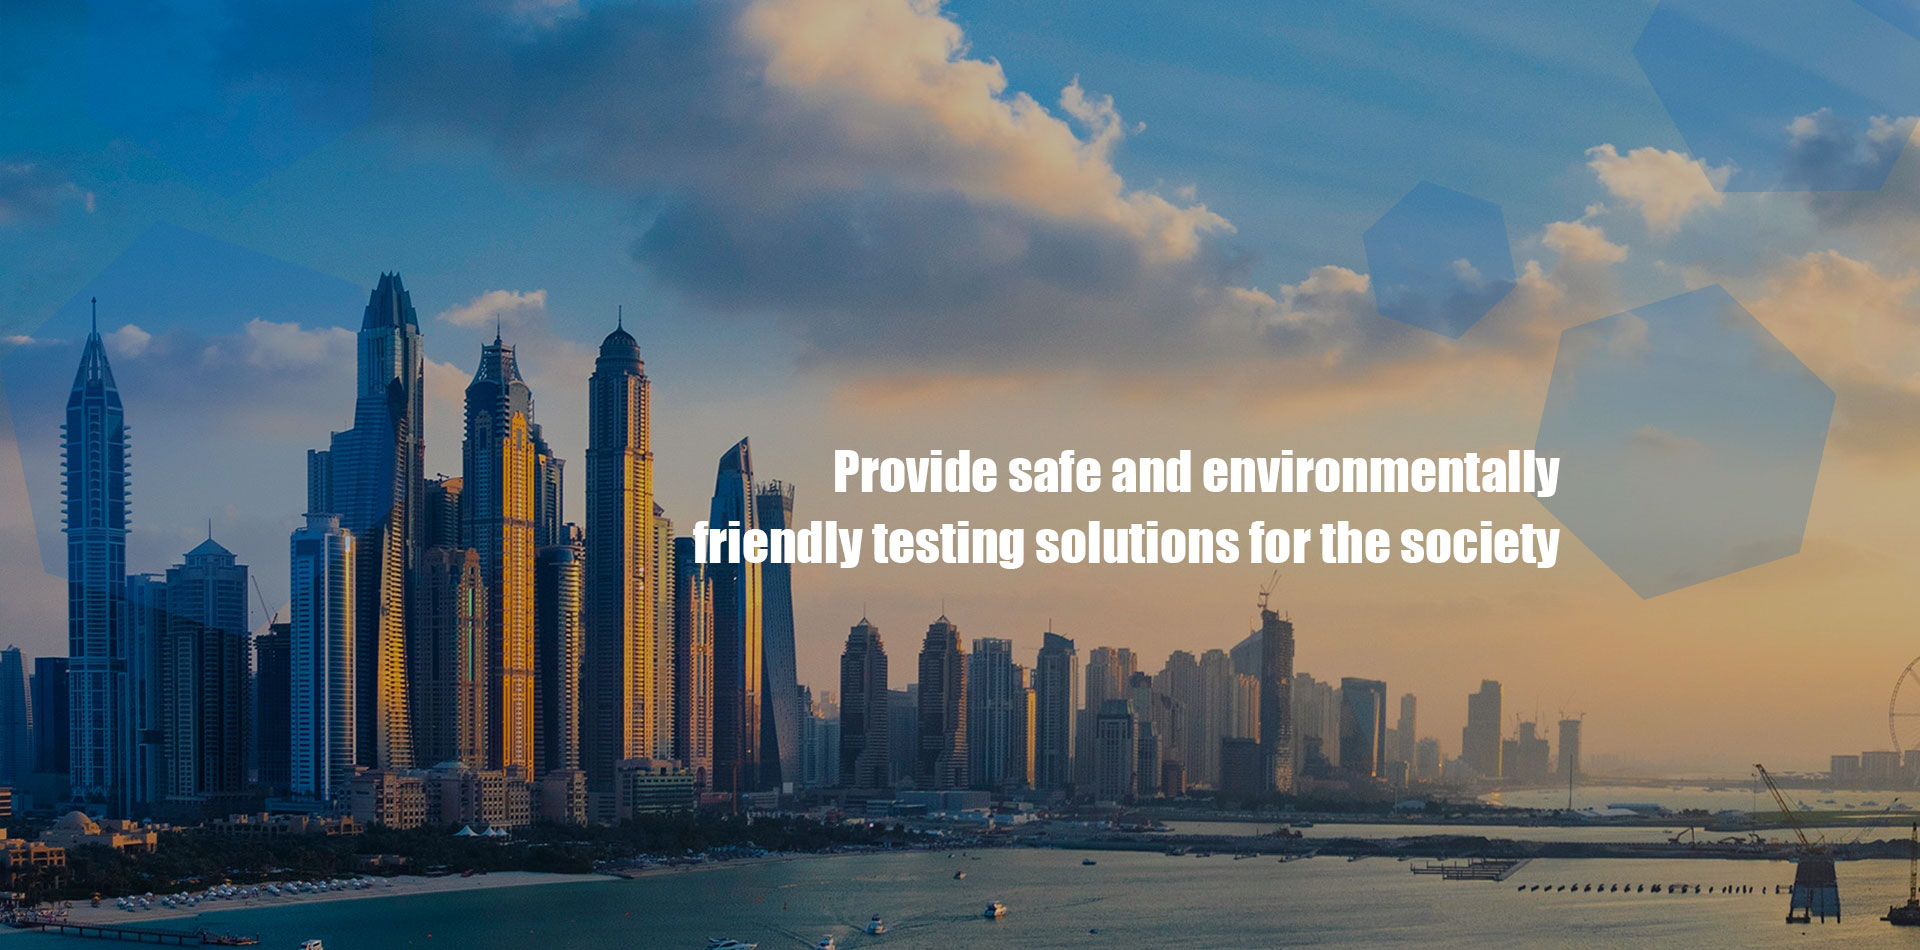 Provide safe and environmentally friendly testing solutions for the society